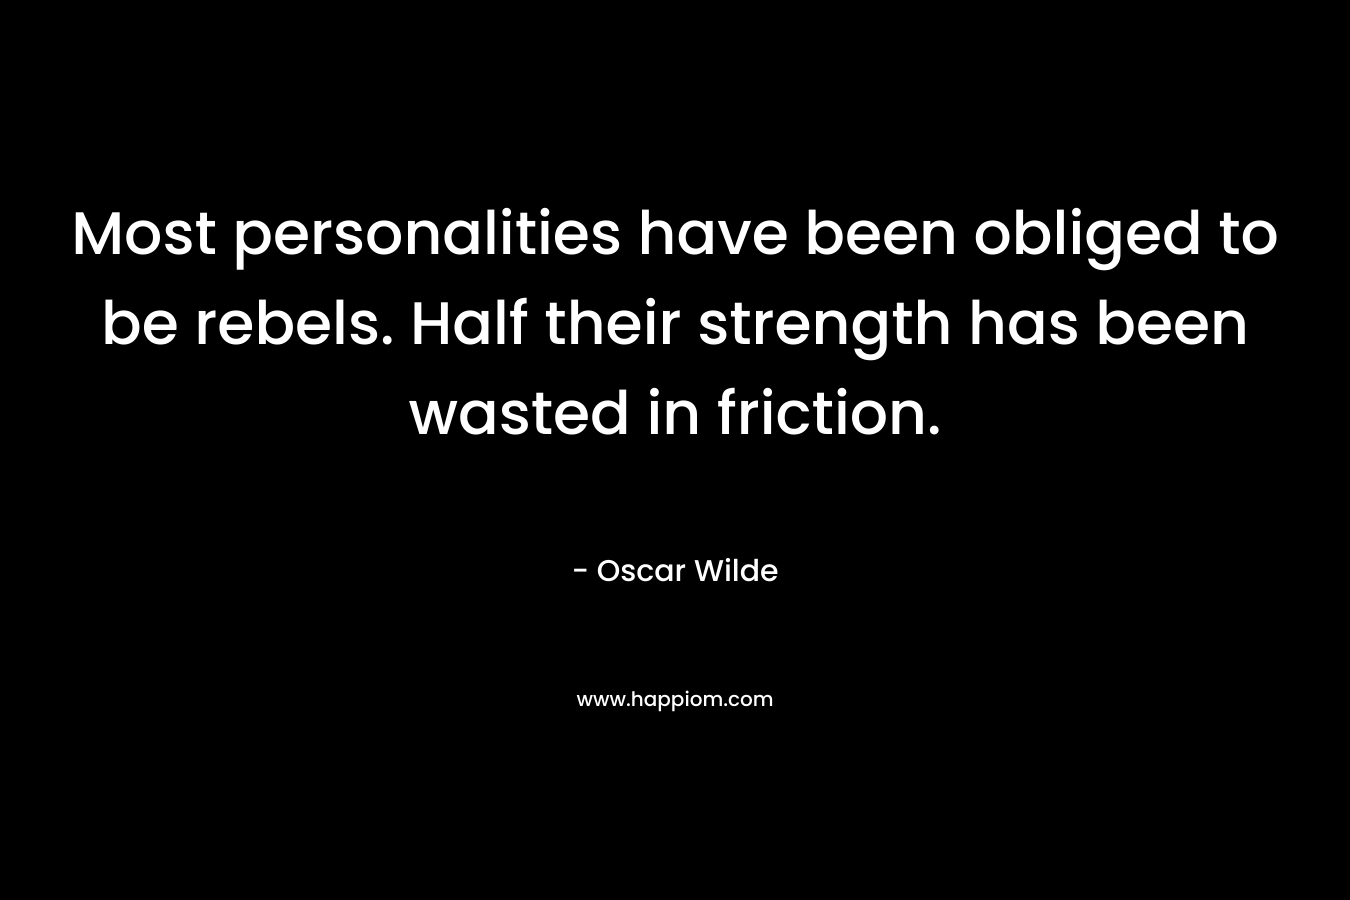 Most personalities have been obliged to be rebels. Half their strength has been wasted in friction.